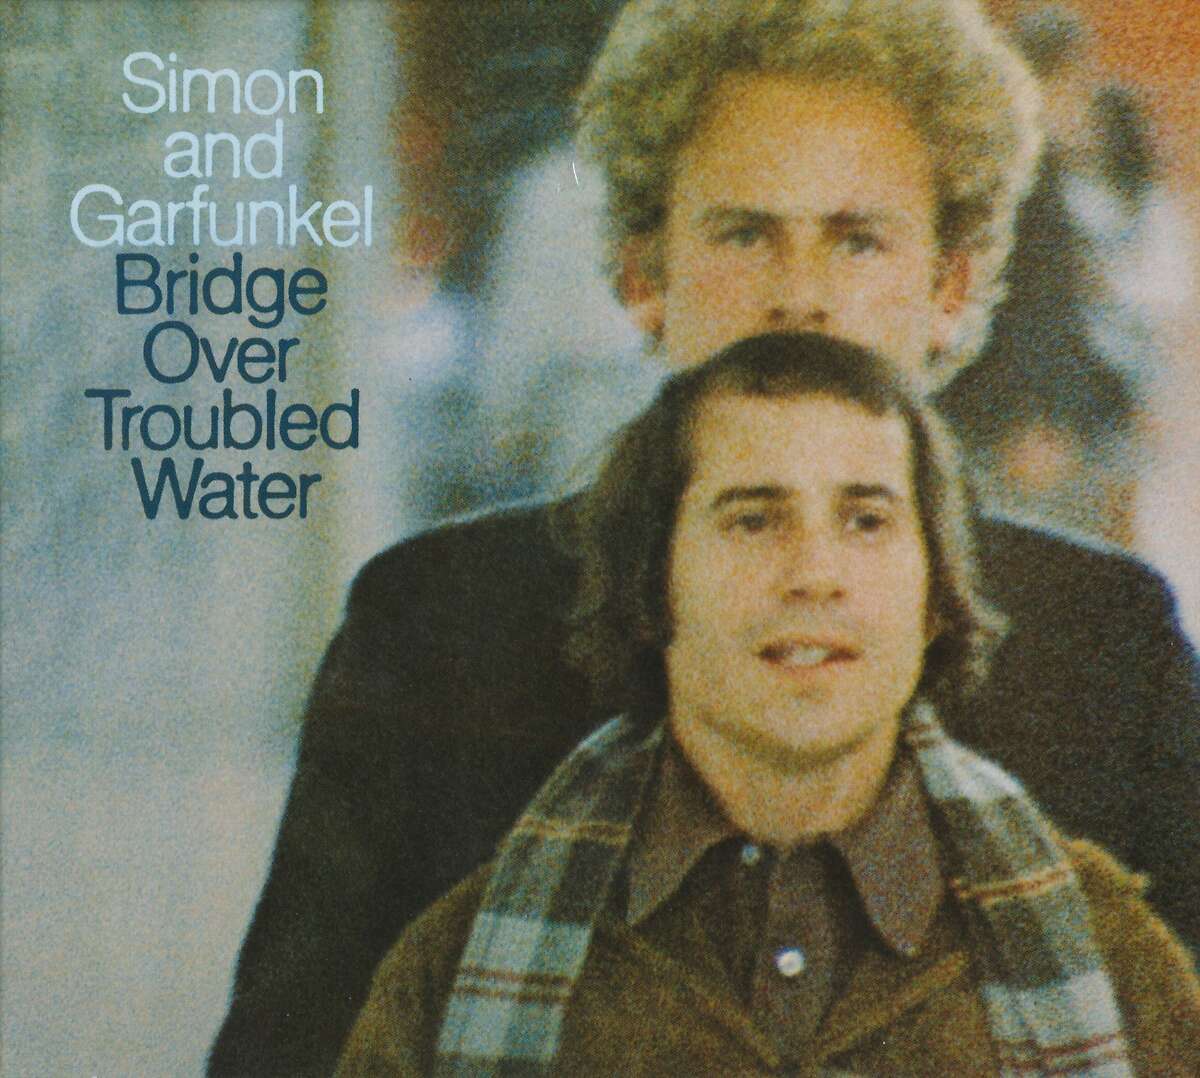 Tony Lane was the art director for Simon and Garfunkel's "Bridge Over Troubled Water."